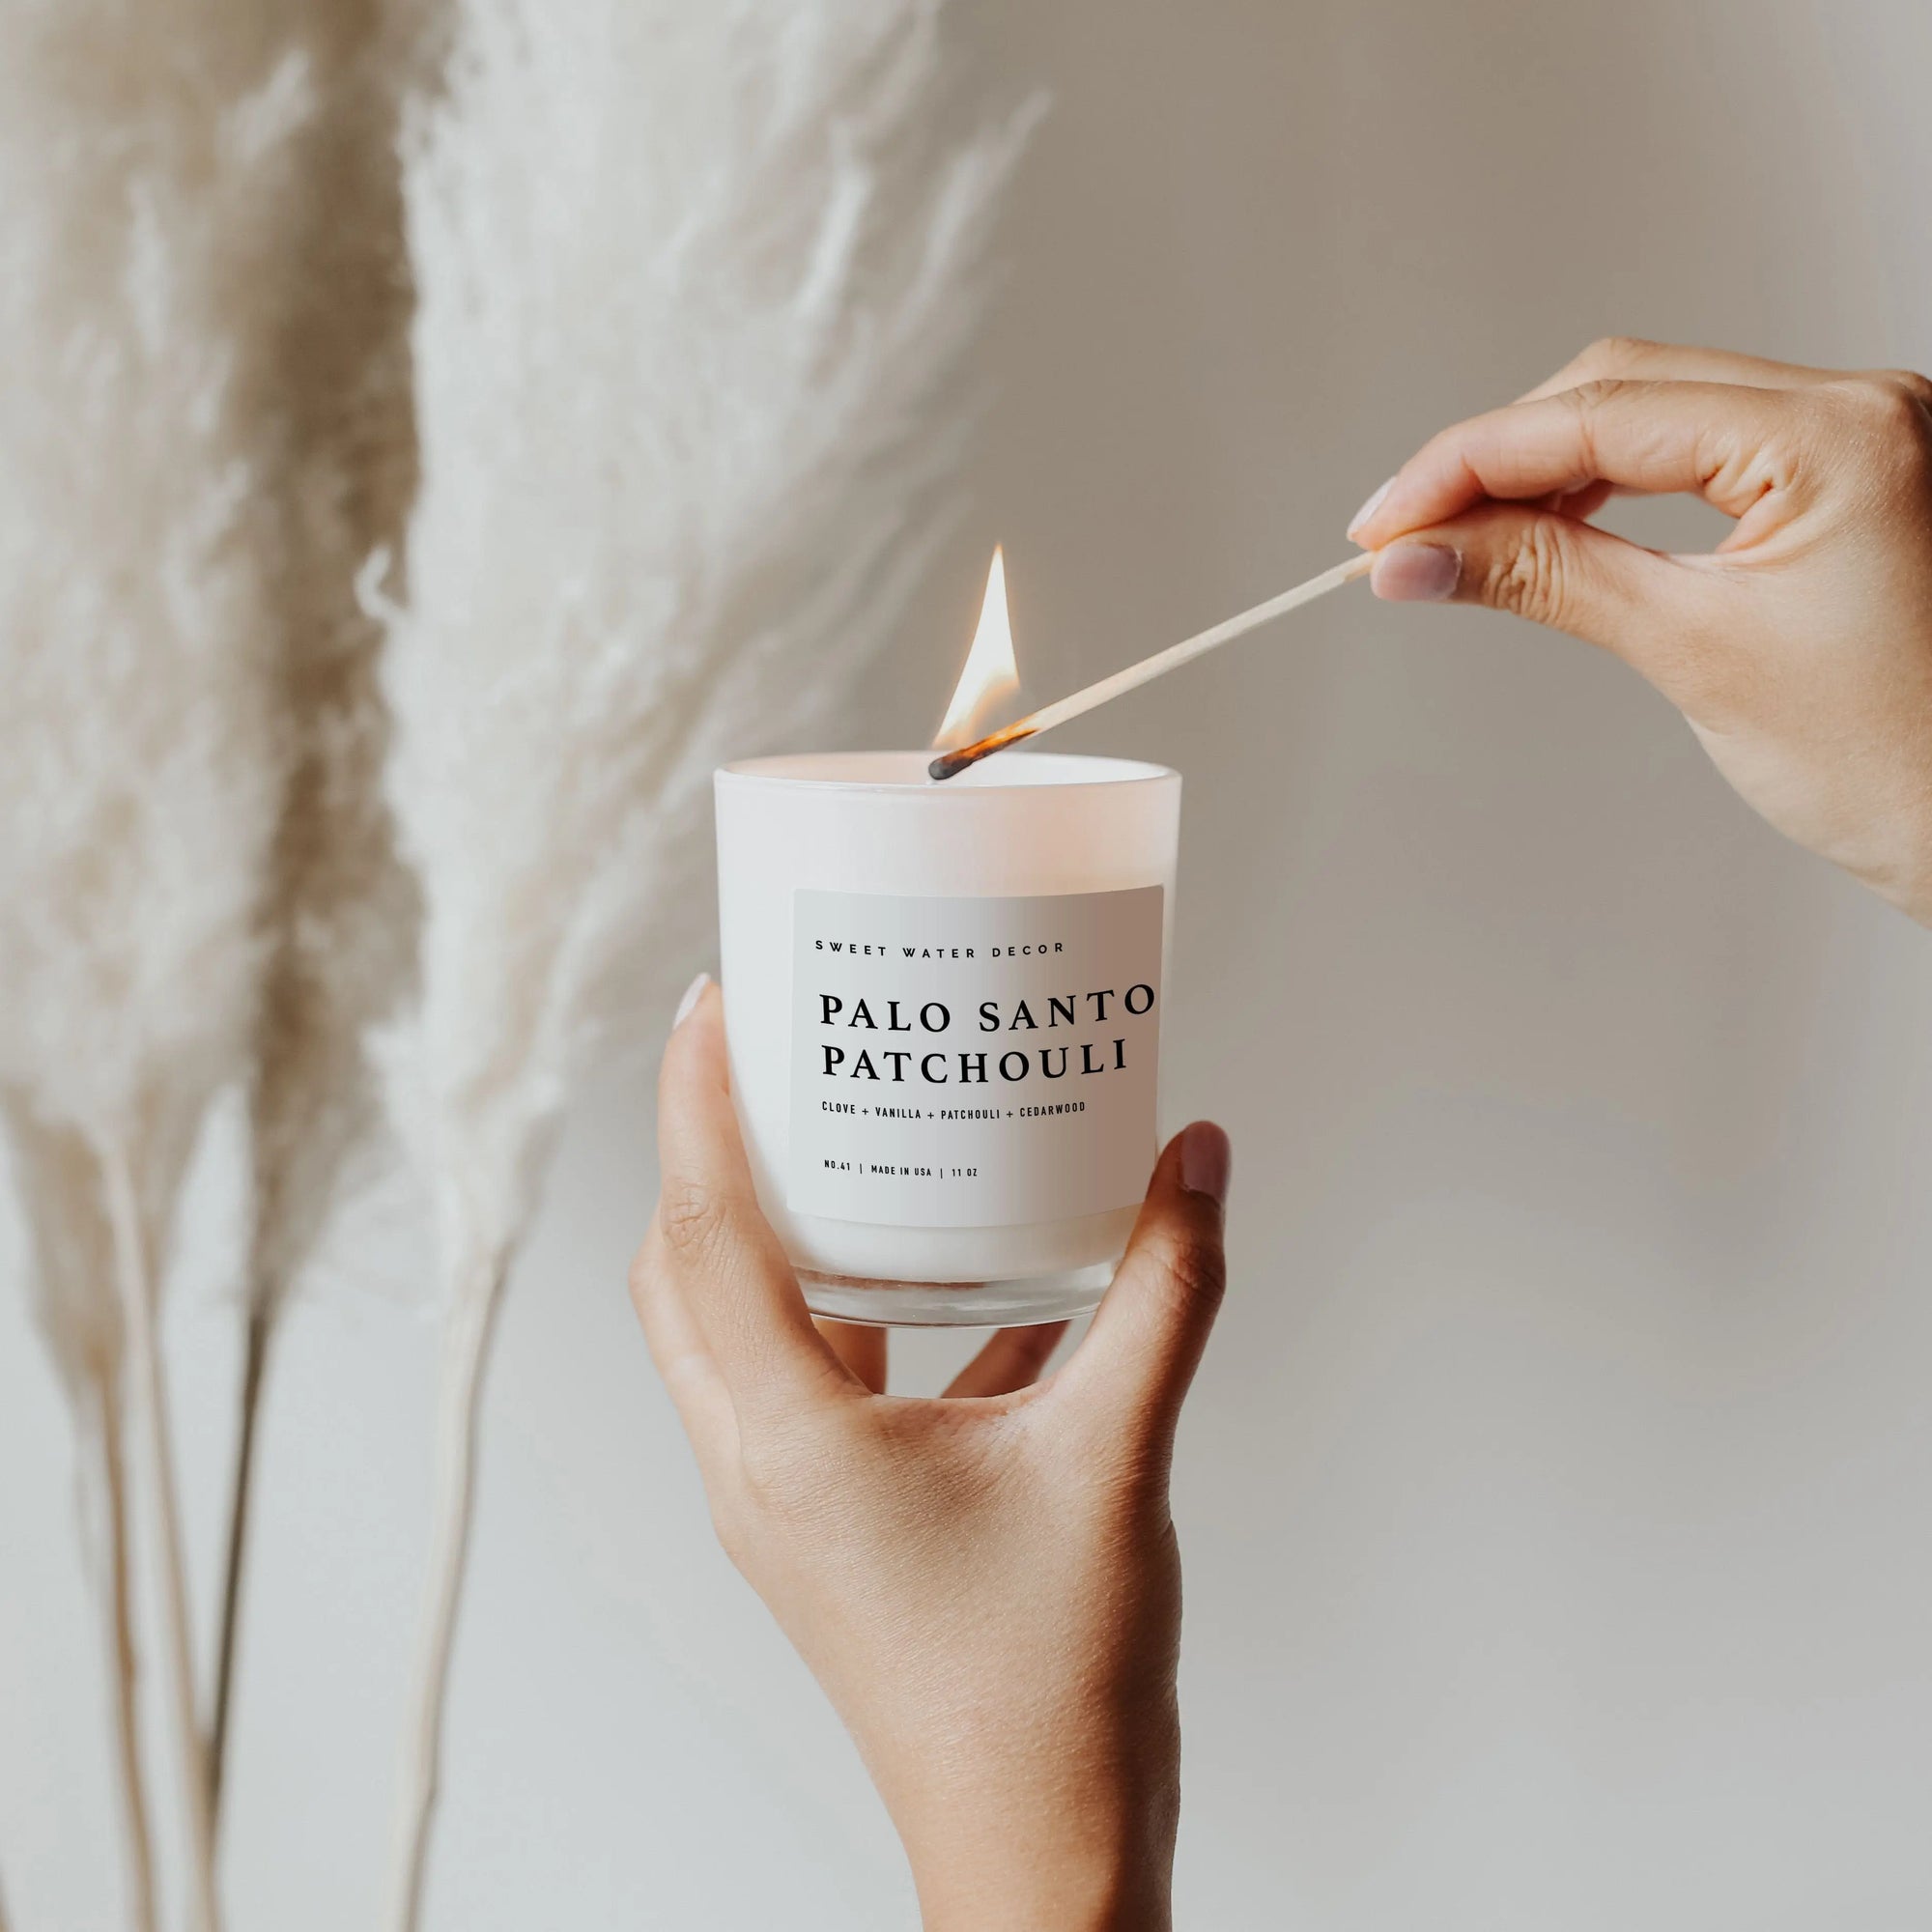 Wood Wick Soy Candles – Everyday North